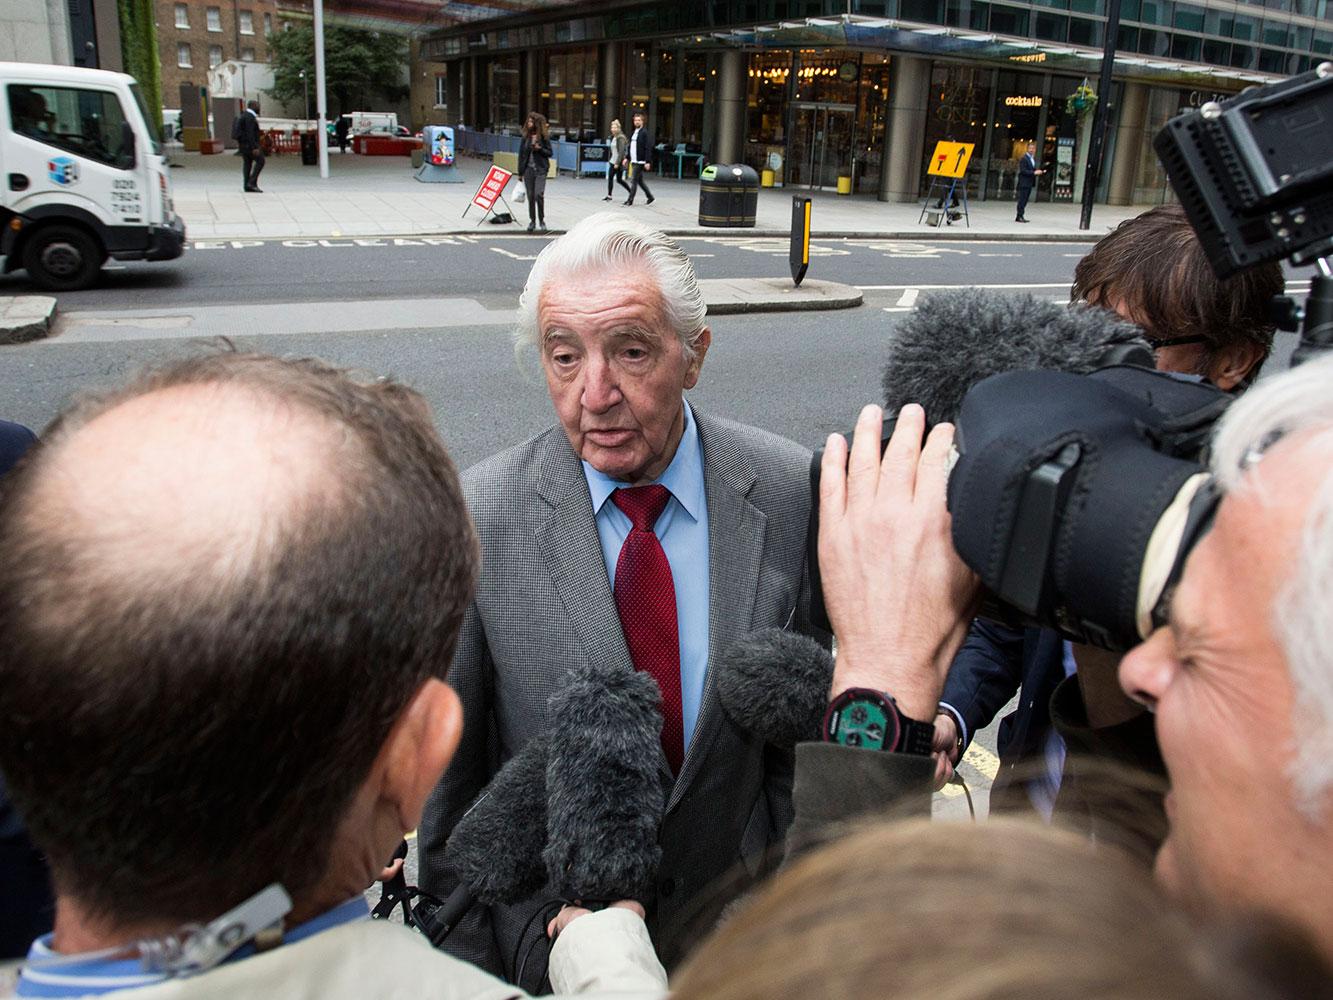 NEC Committee member and former Chairman of the Labour Party Dennis Skinner